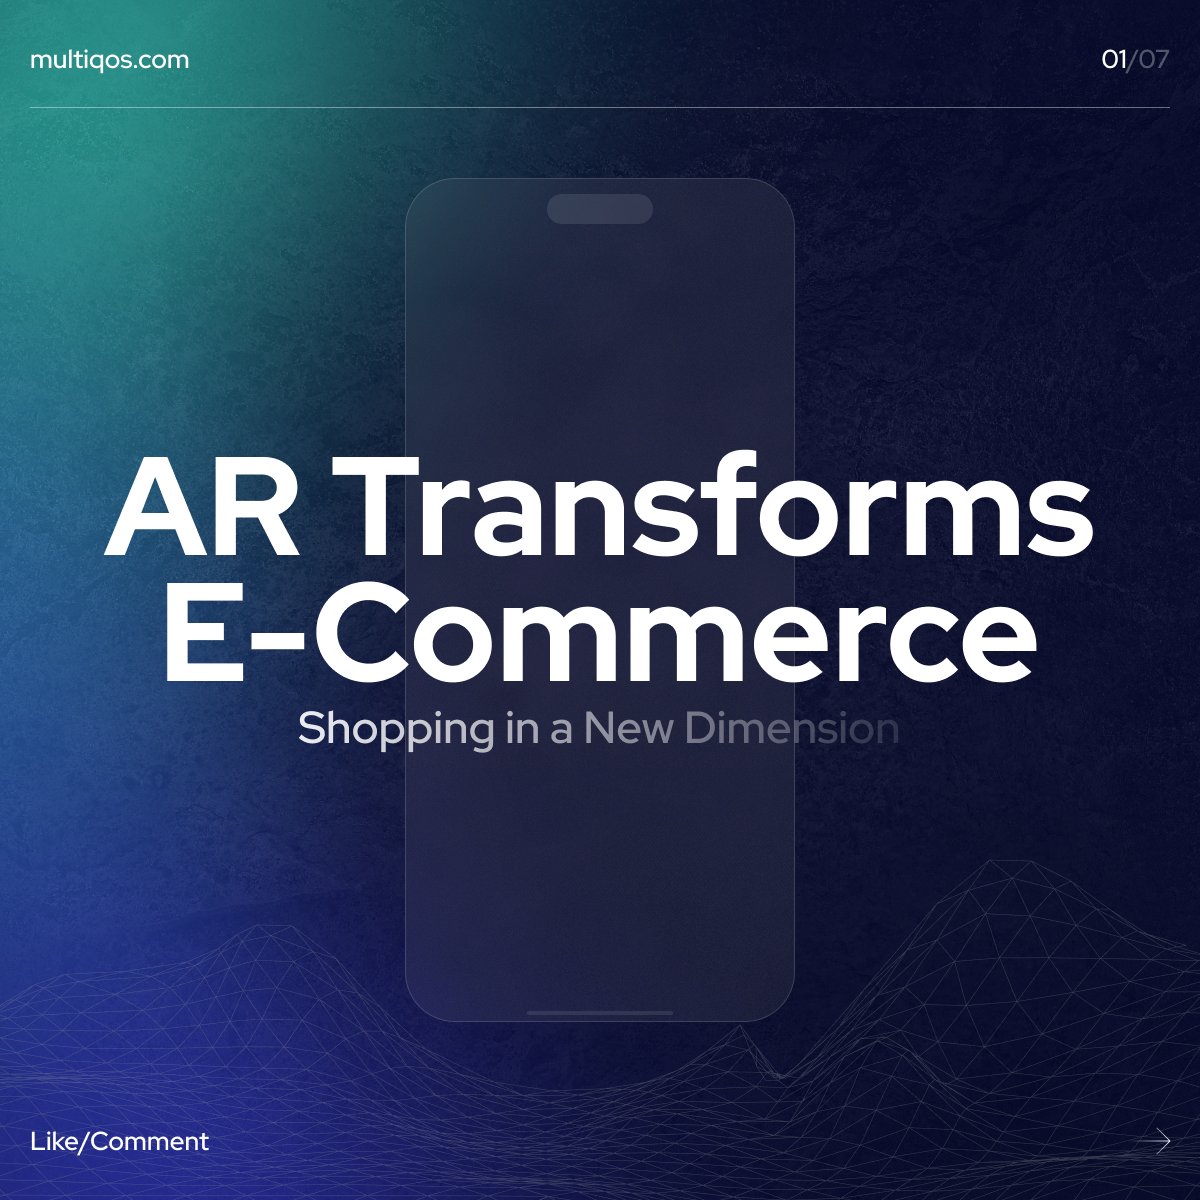 The Future of Shopping is HERE! Explore how AR is shaping E-commerce Industry! ✨  

#arinecommerce #retailrevolution #augmentedreality #shopsmart #ecommercetrends #latestupdates #trends #webdevelopment #ardevelopment #virtualshopping 

bit.ly/3twDR3D